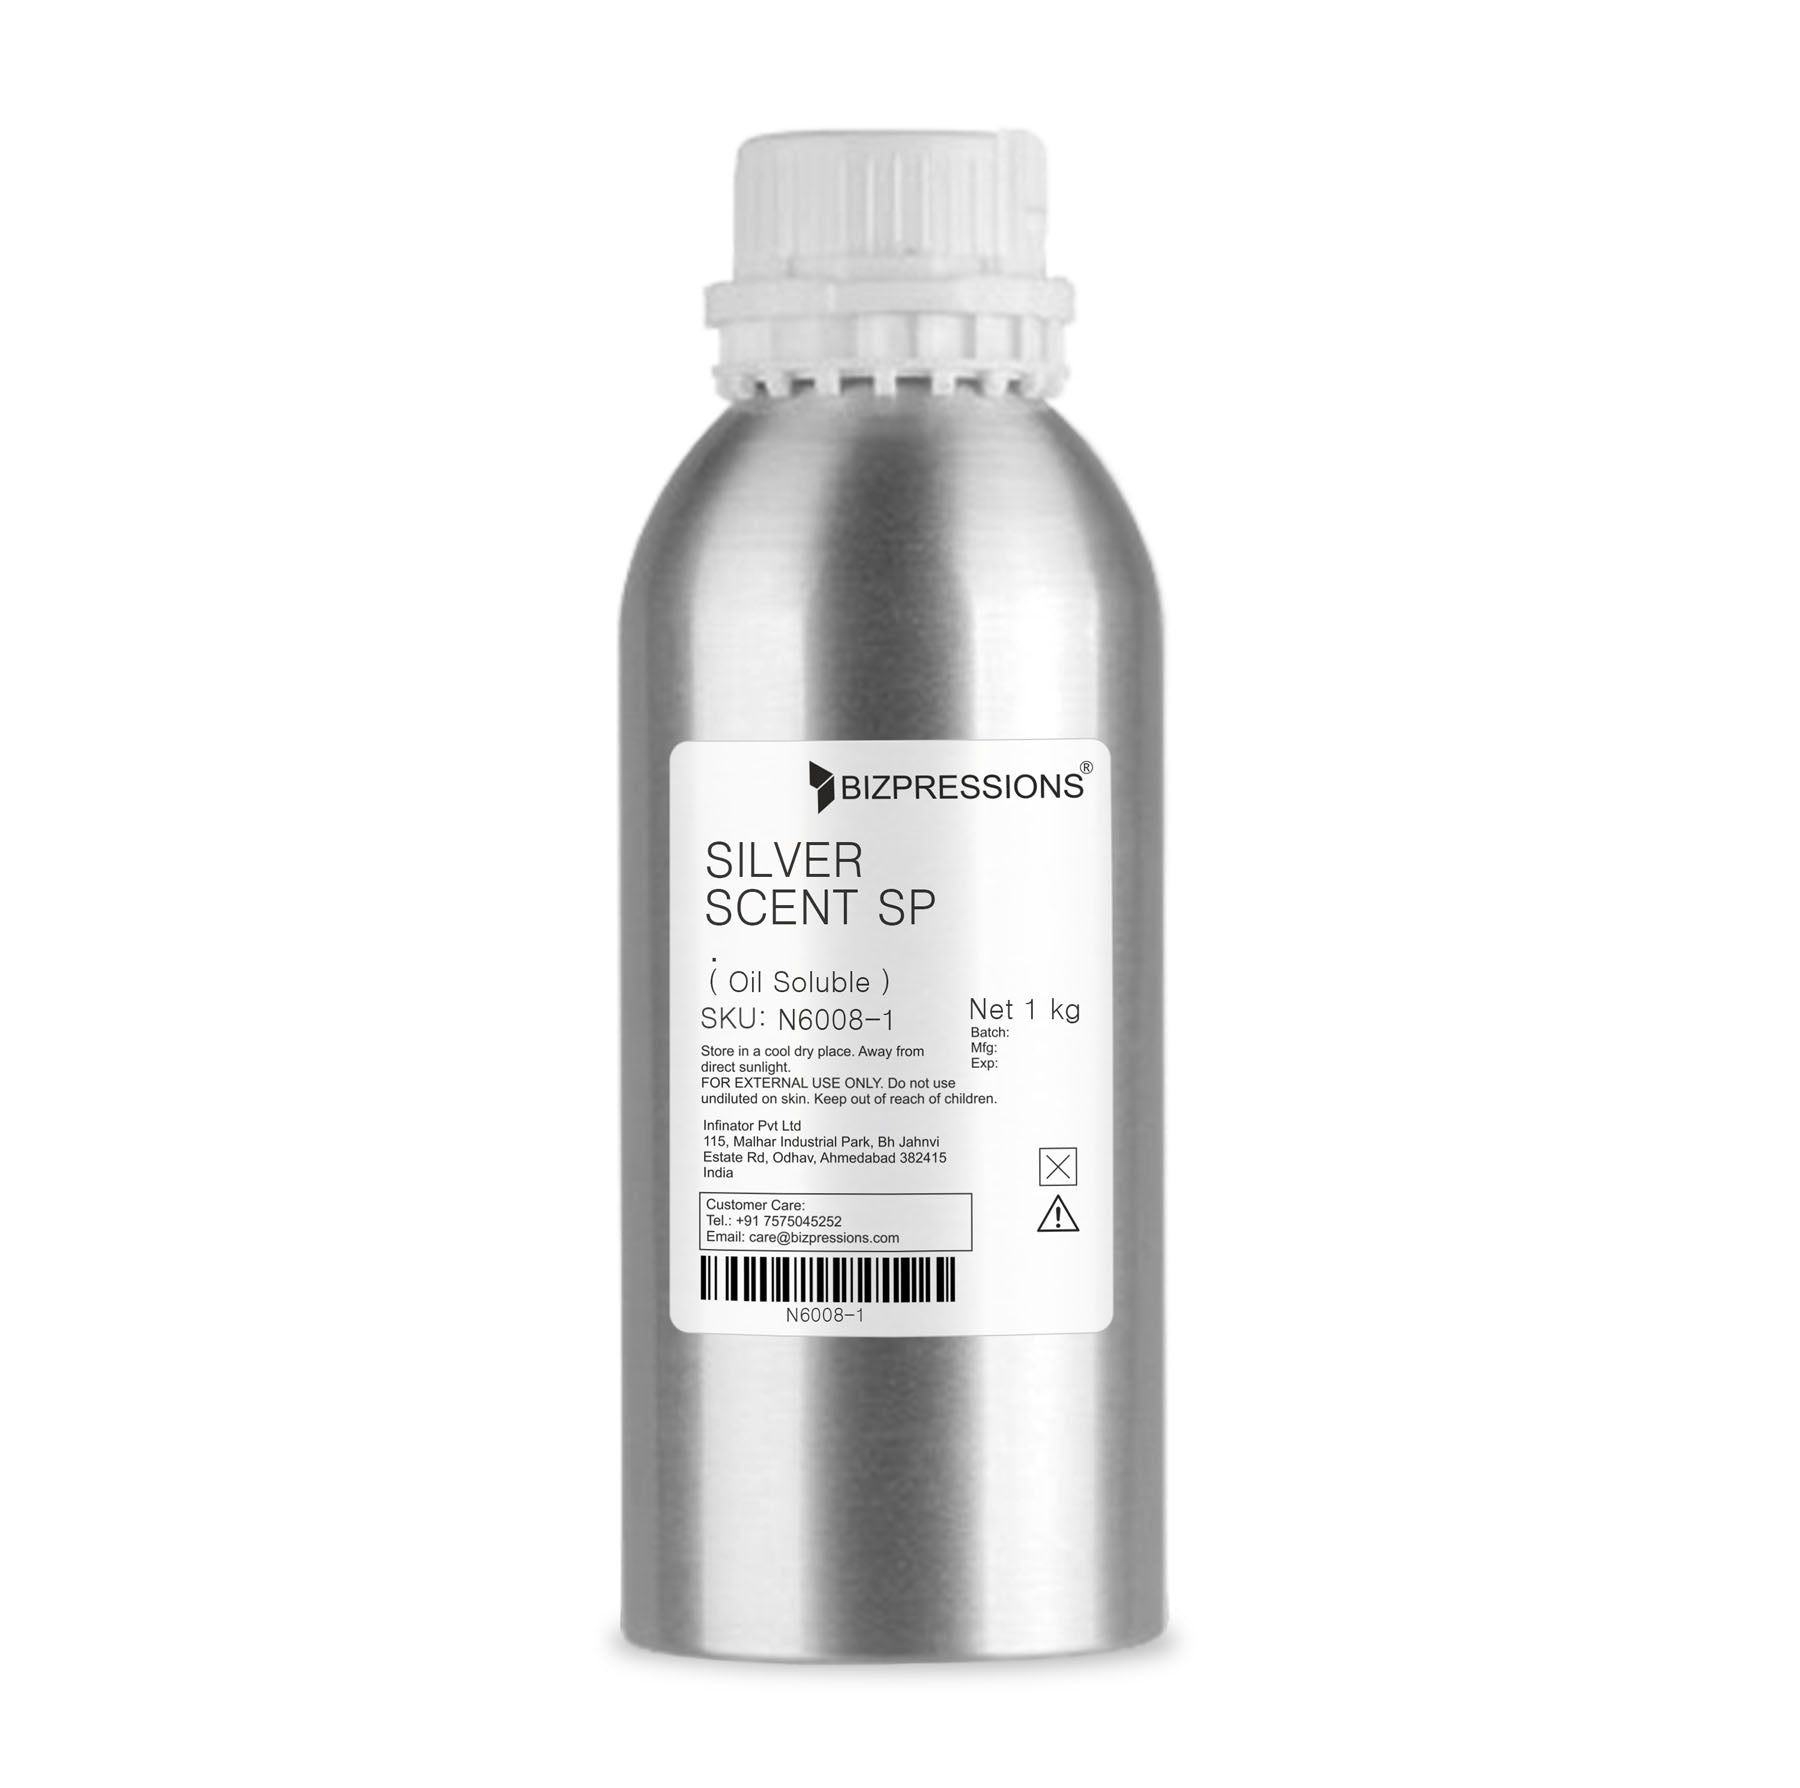 SILVER SCENT SP - Fragrance ( Oil Soluble )